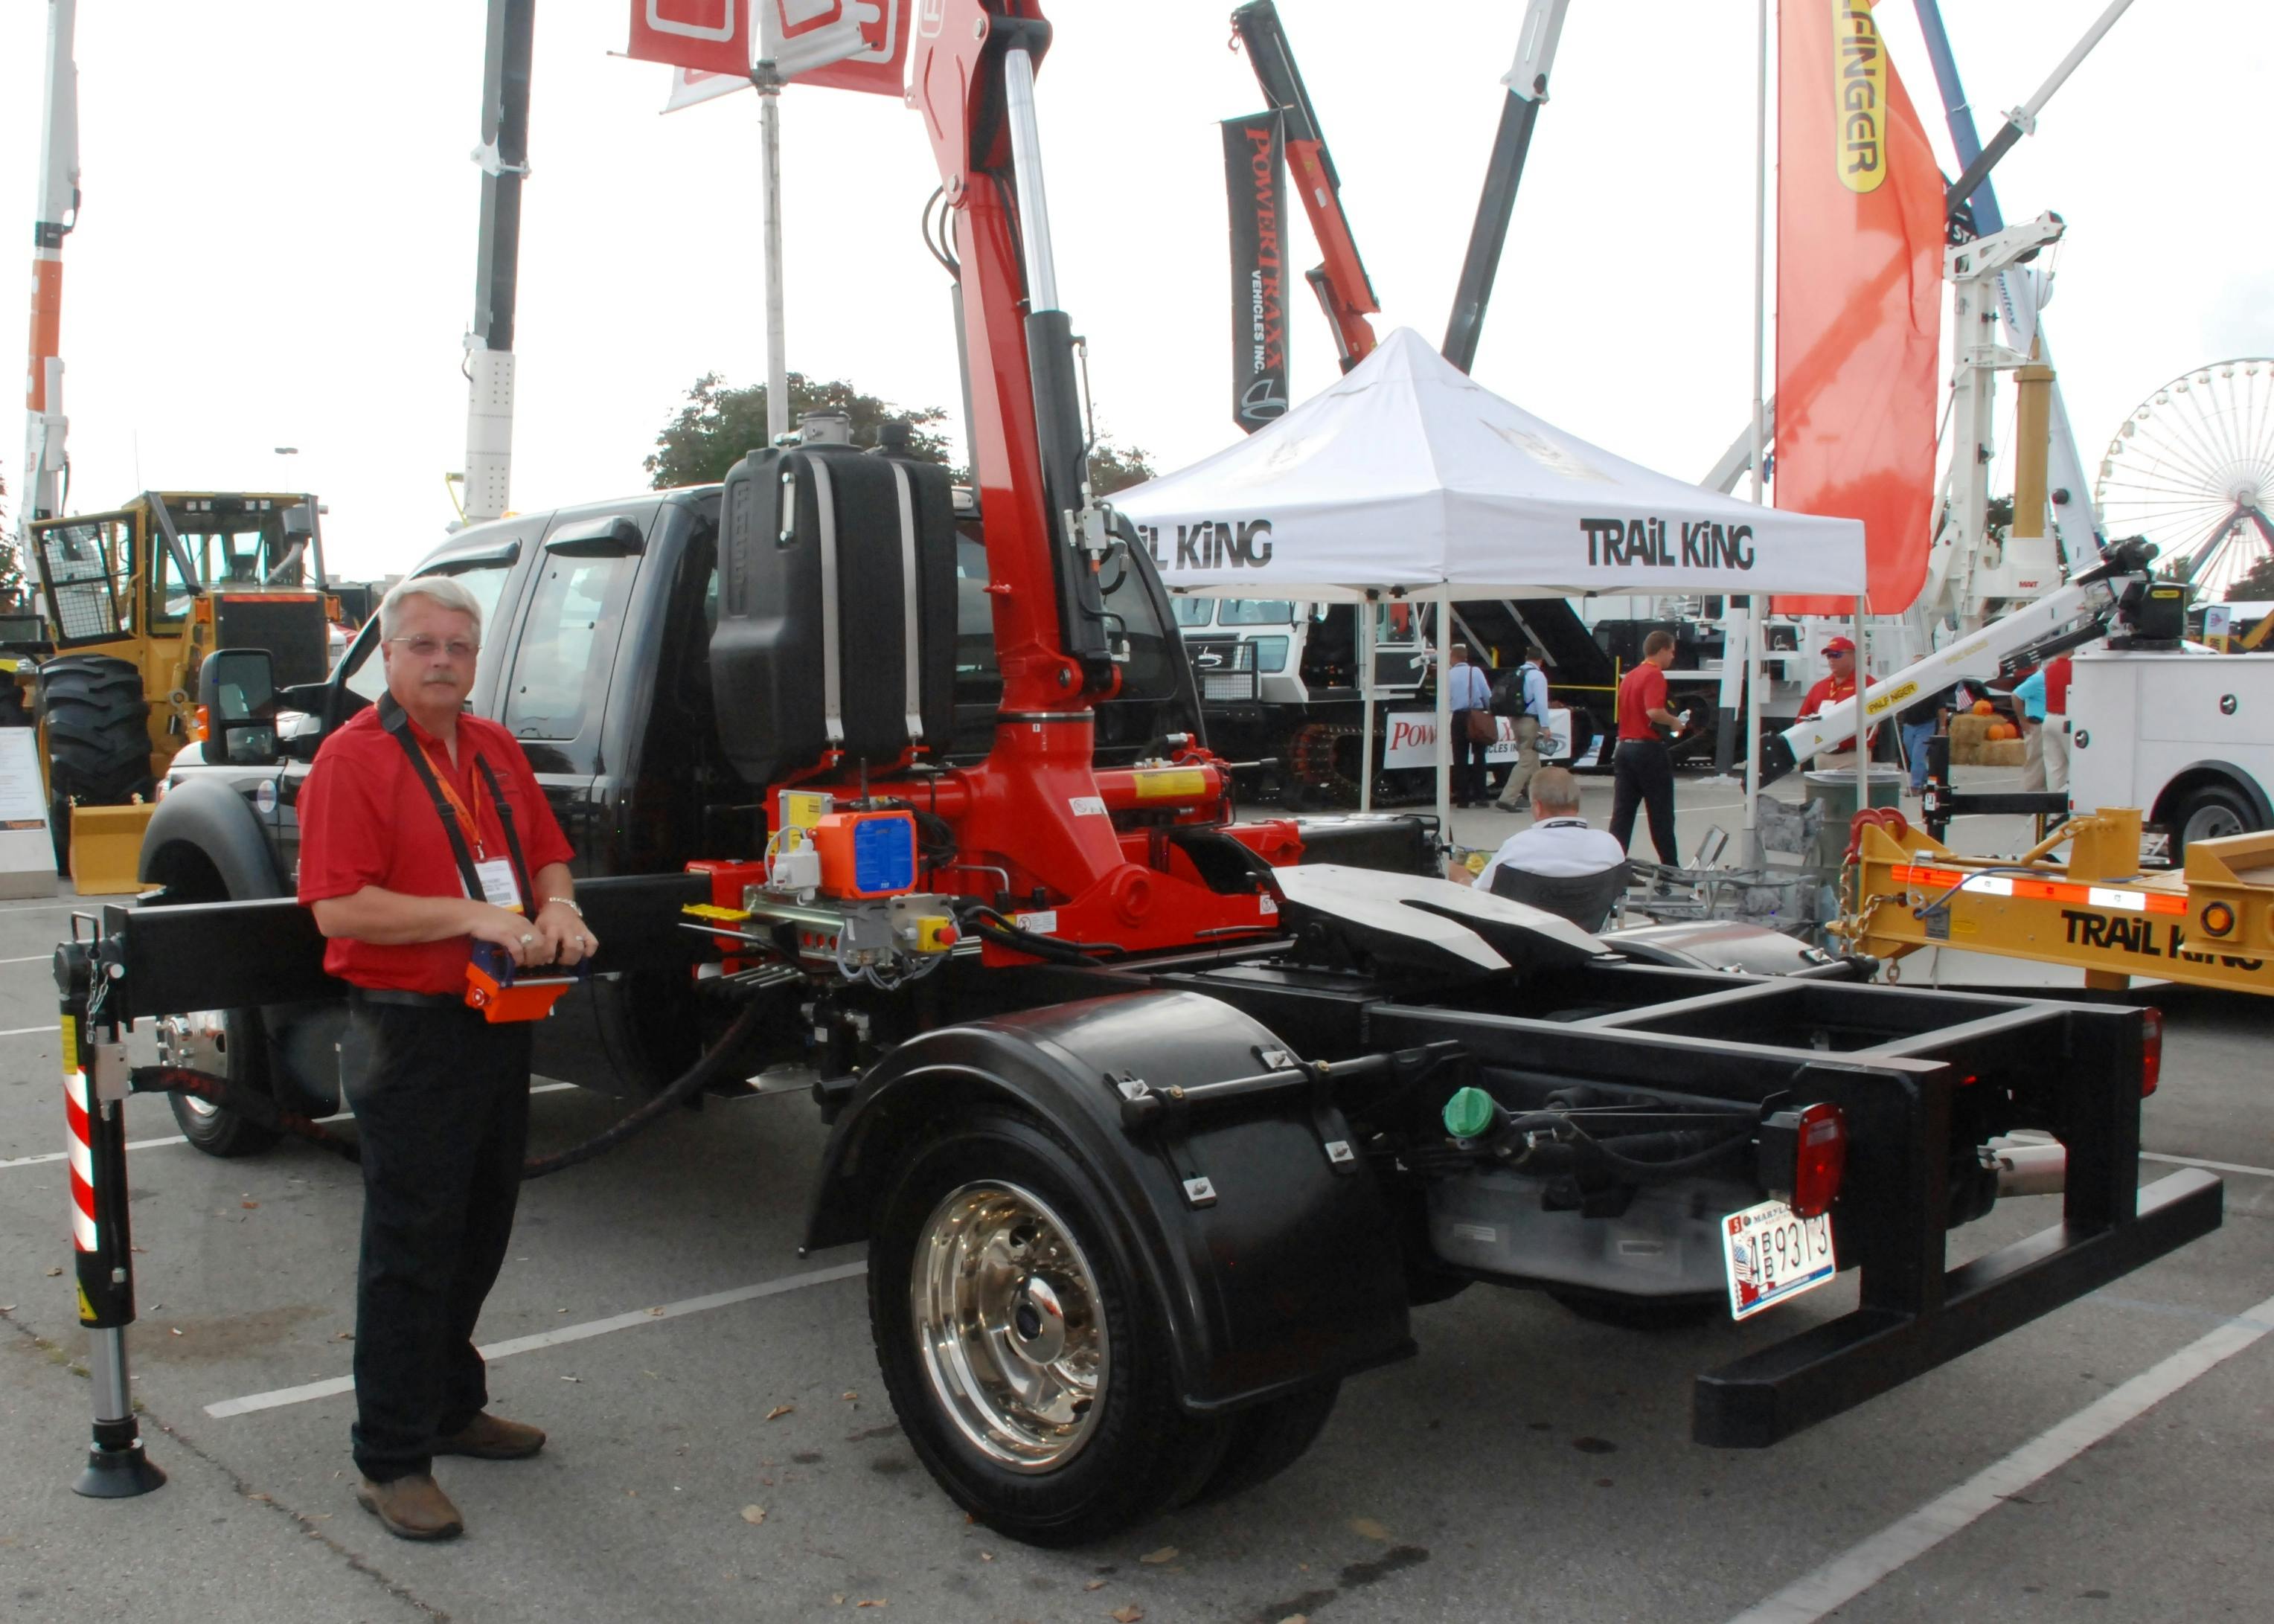 Fascan Exhibits Fassi F65 Knuckleboom for Small Trucks | Construction News